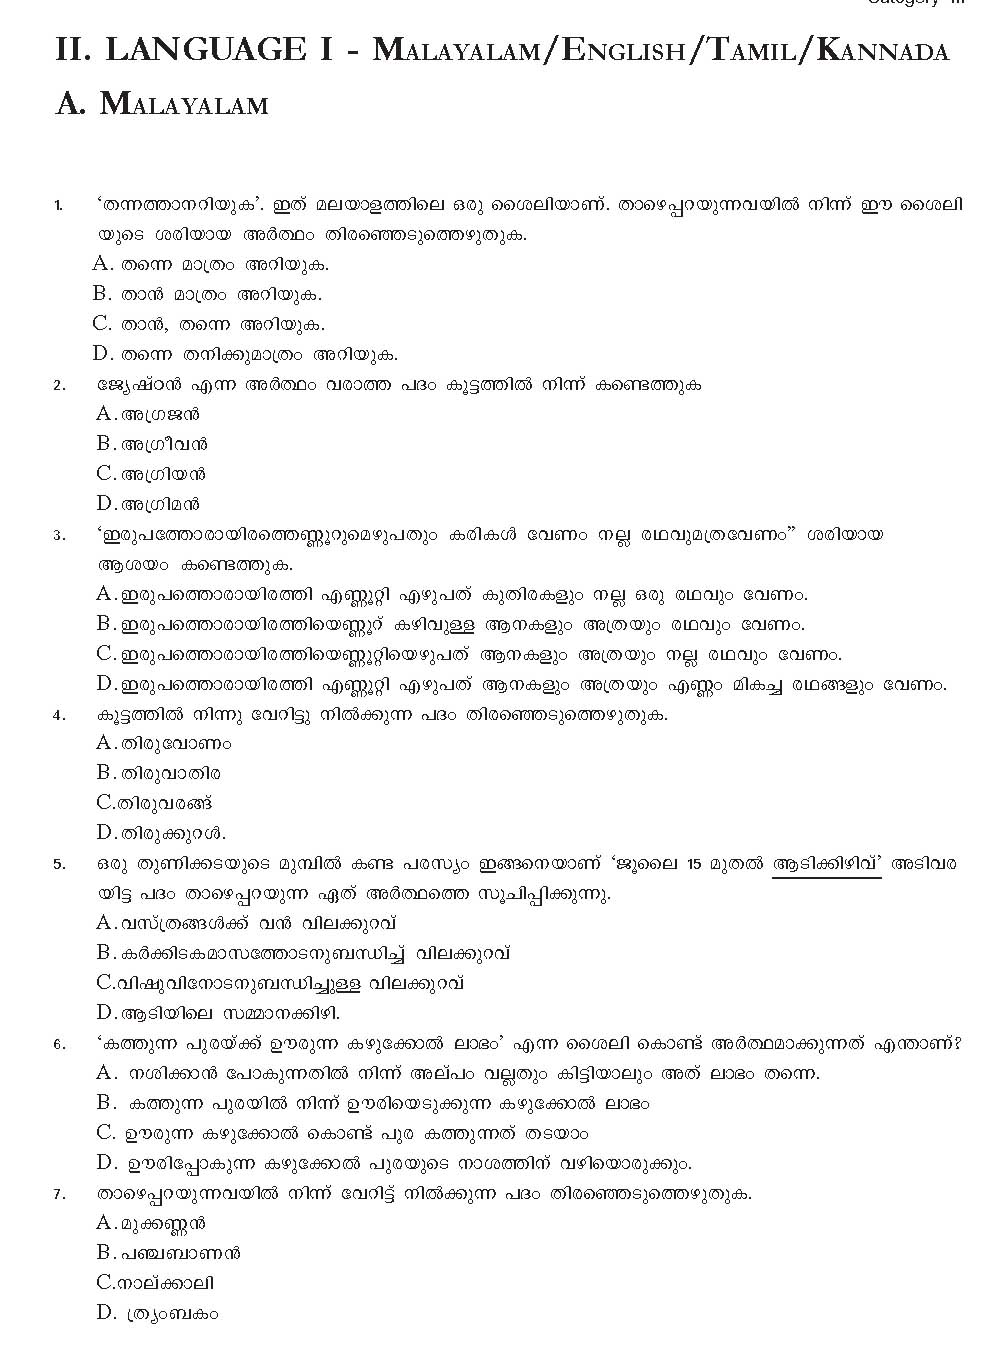 KTET Category III Paper III Language I Question Paper with Answers 2012 1